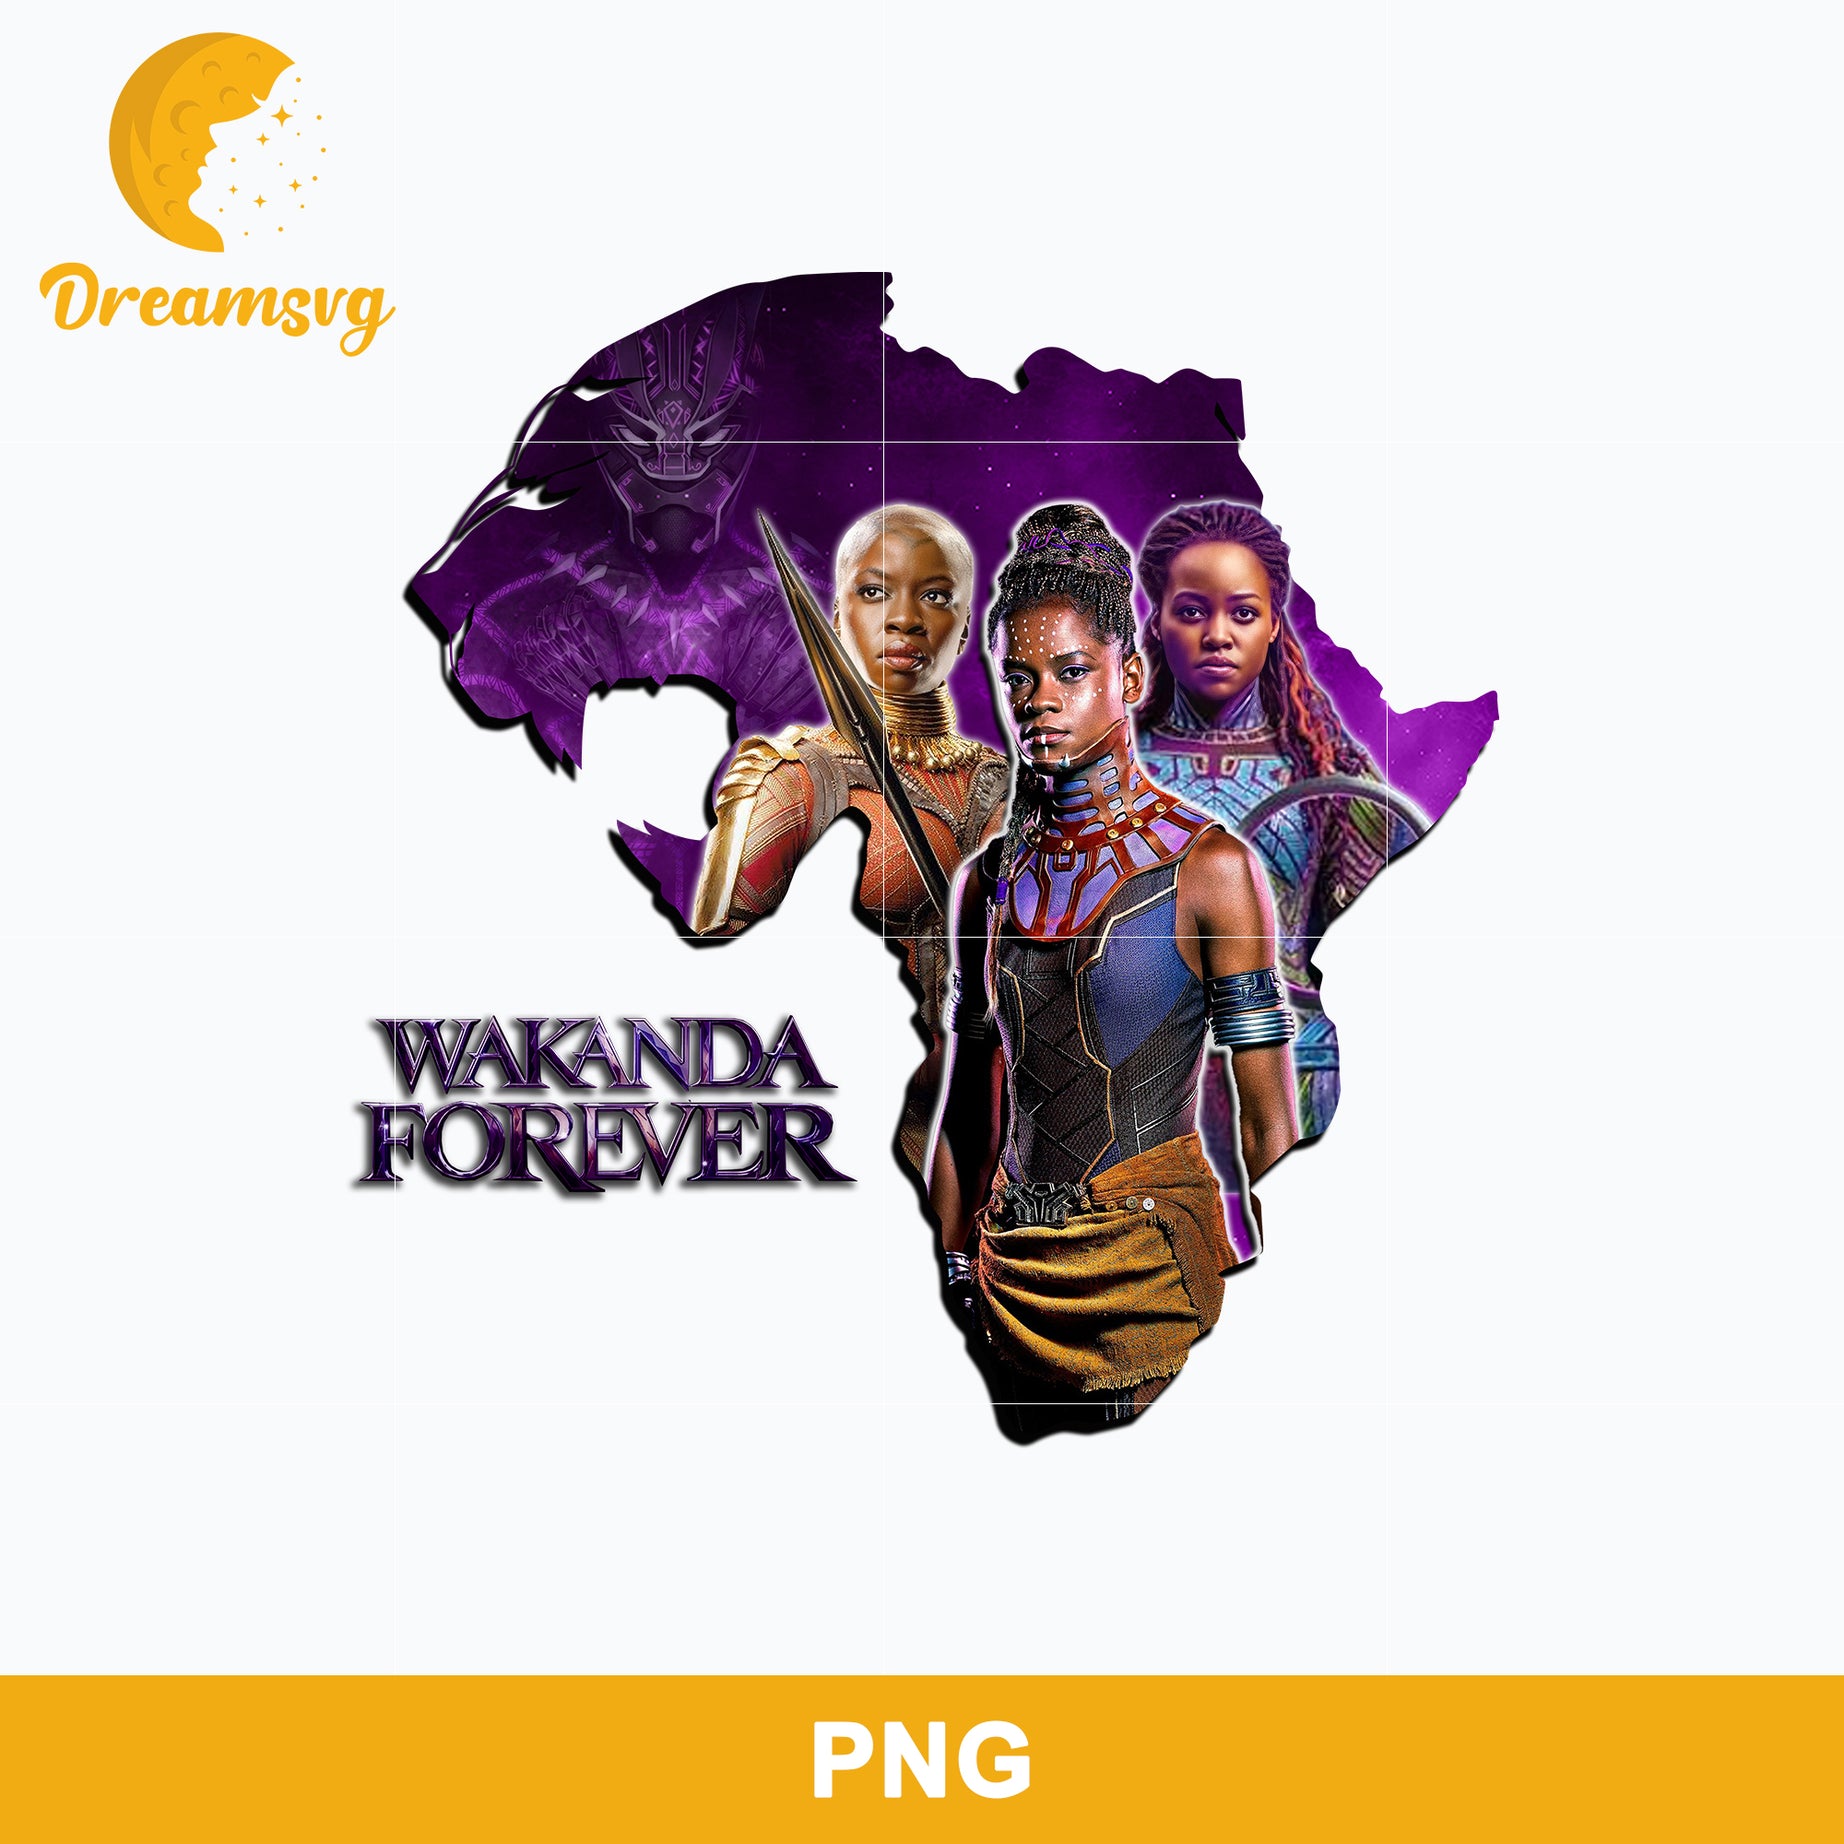 Copy of Black Panther Wakanda Forever PNG, Wakanda Forever PNG, Marvel PNG